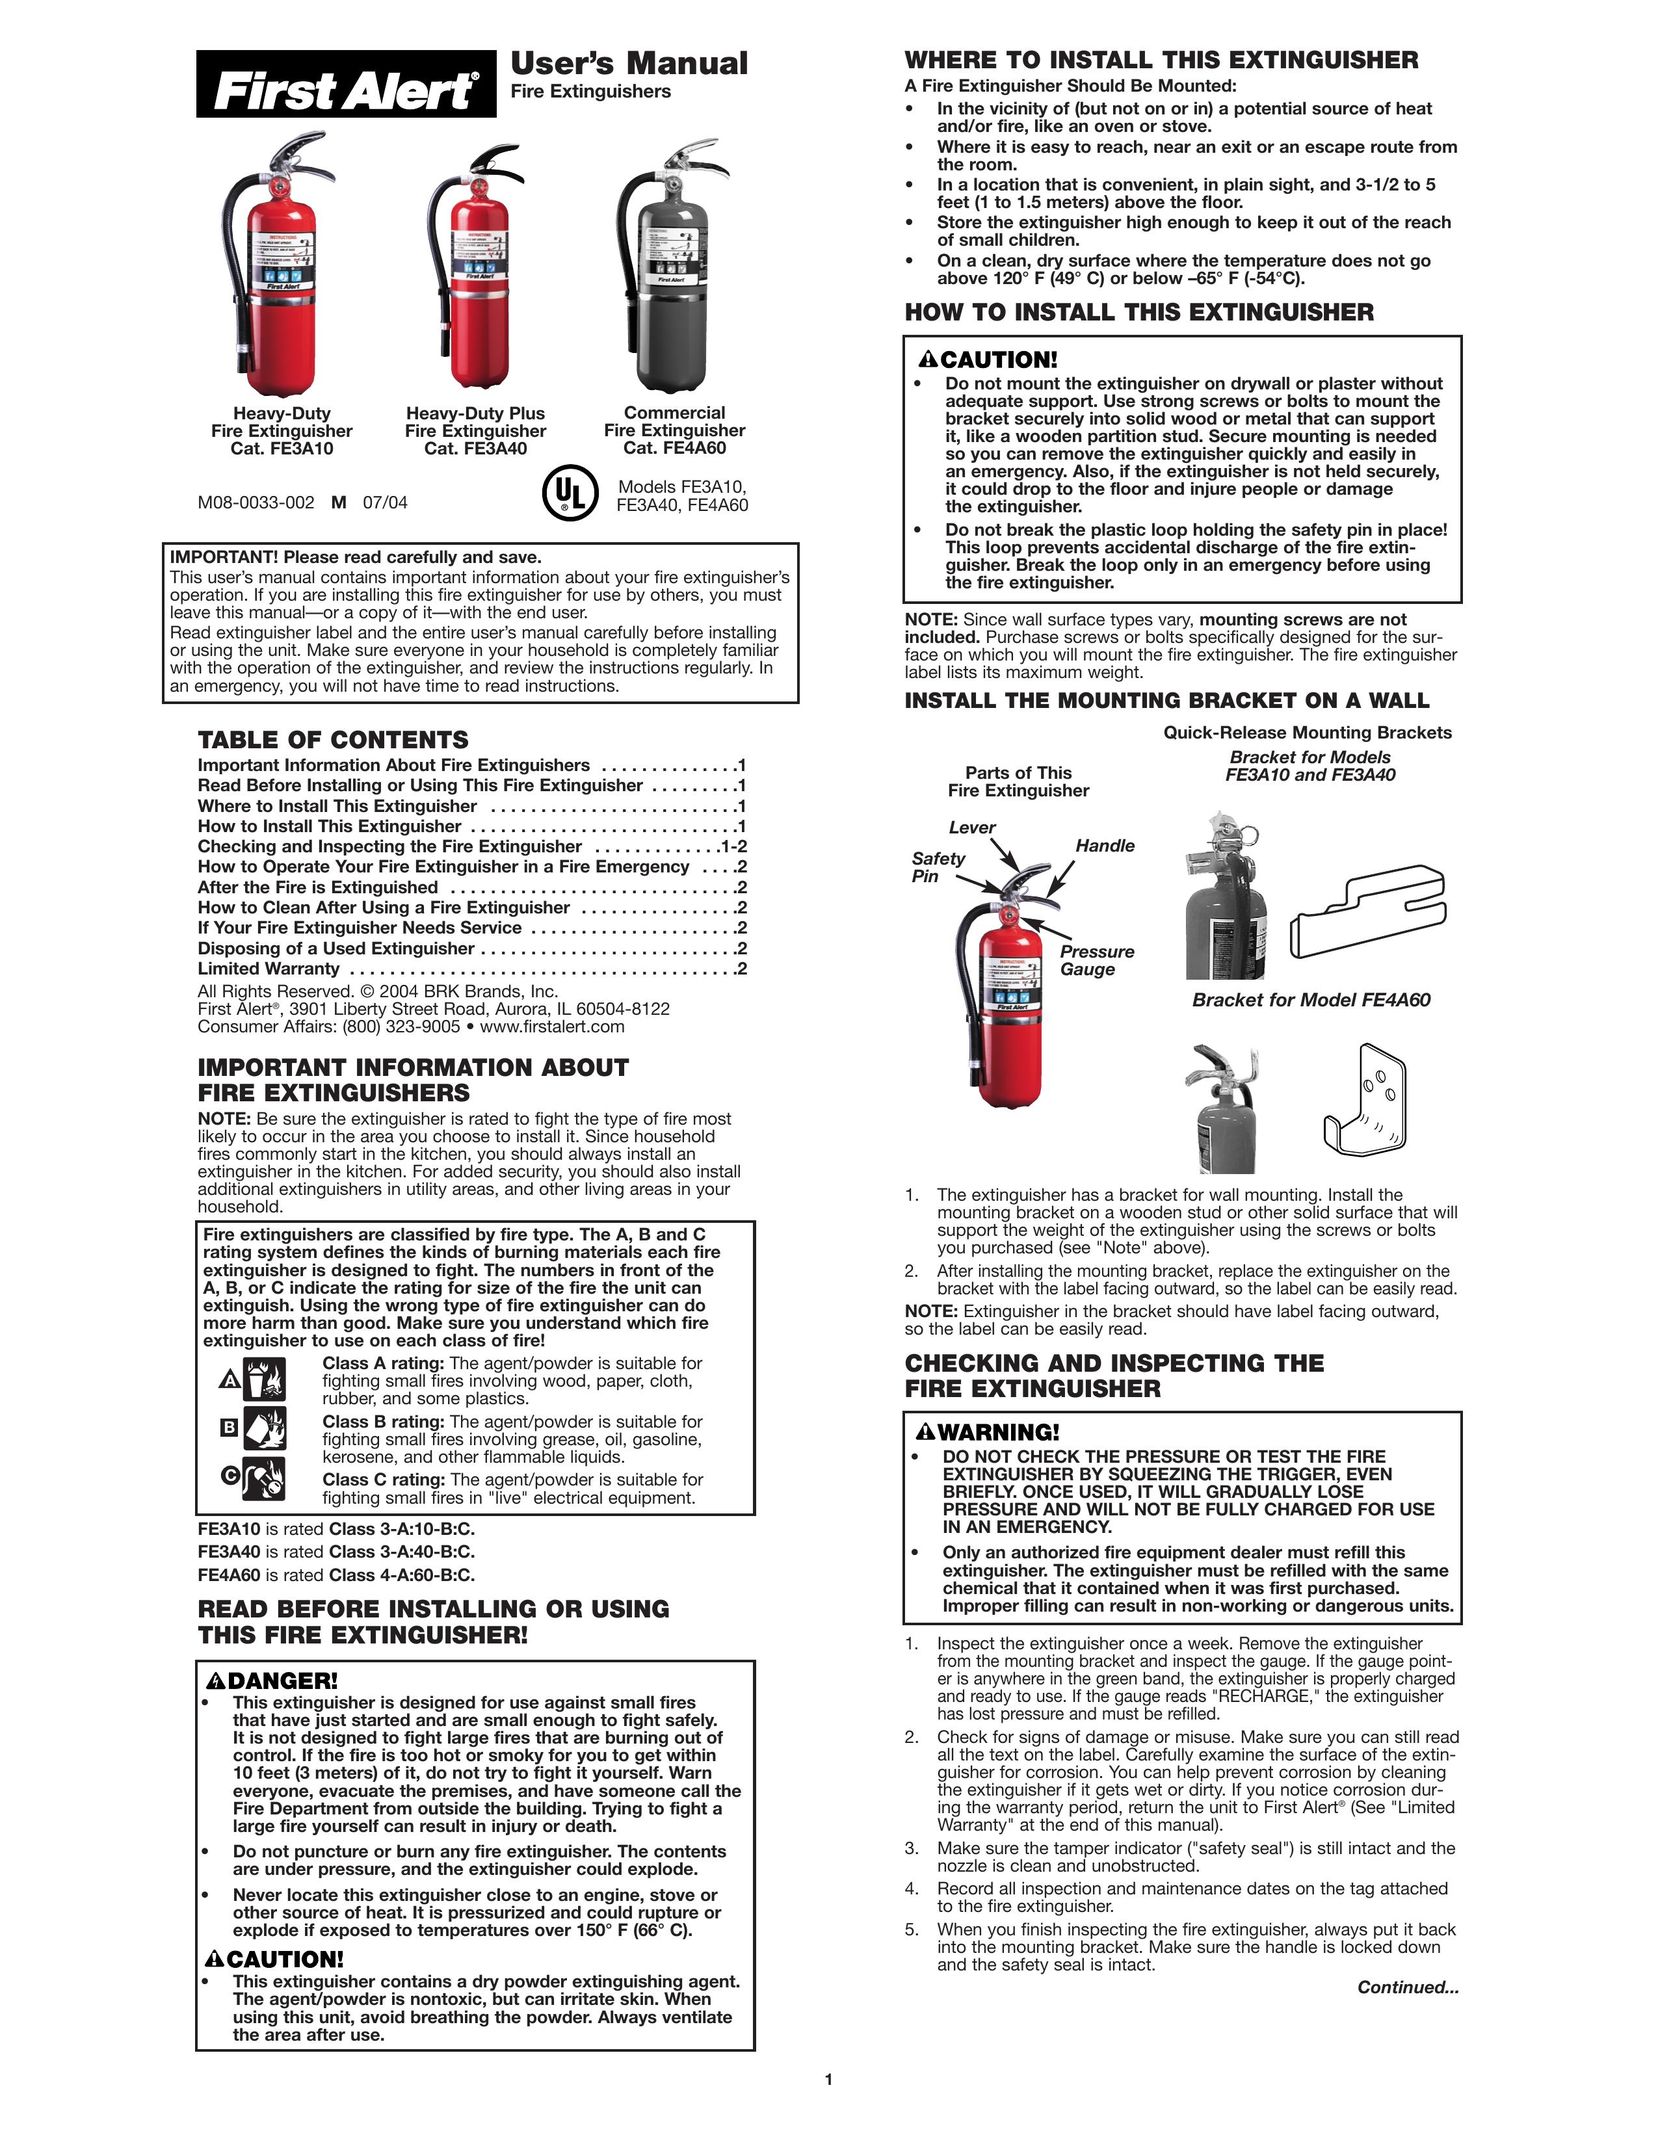 First Alert FE3A40 Fire Extinguisher User Manual